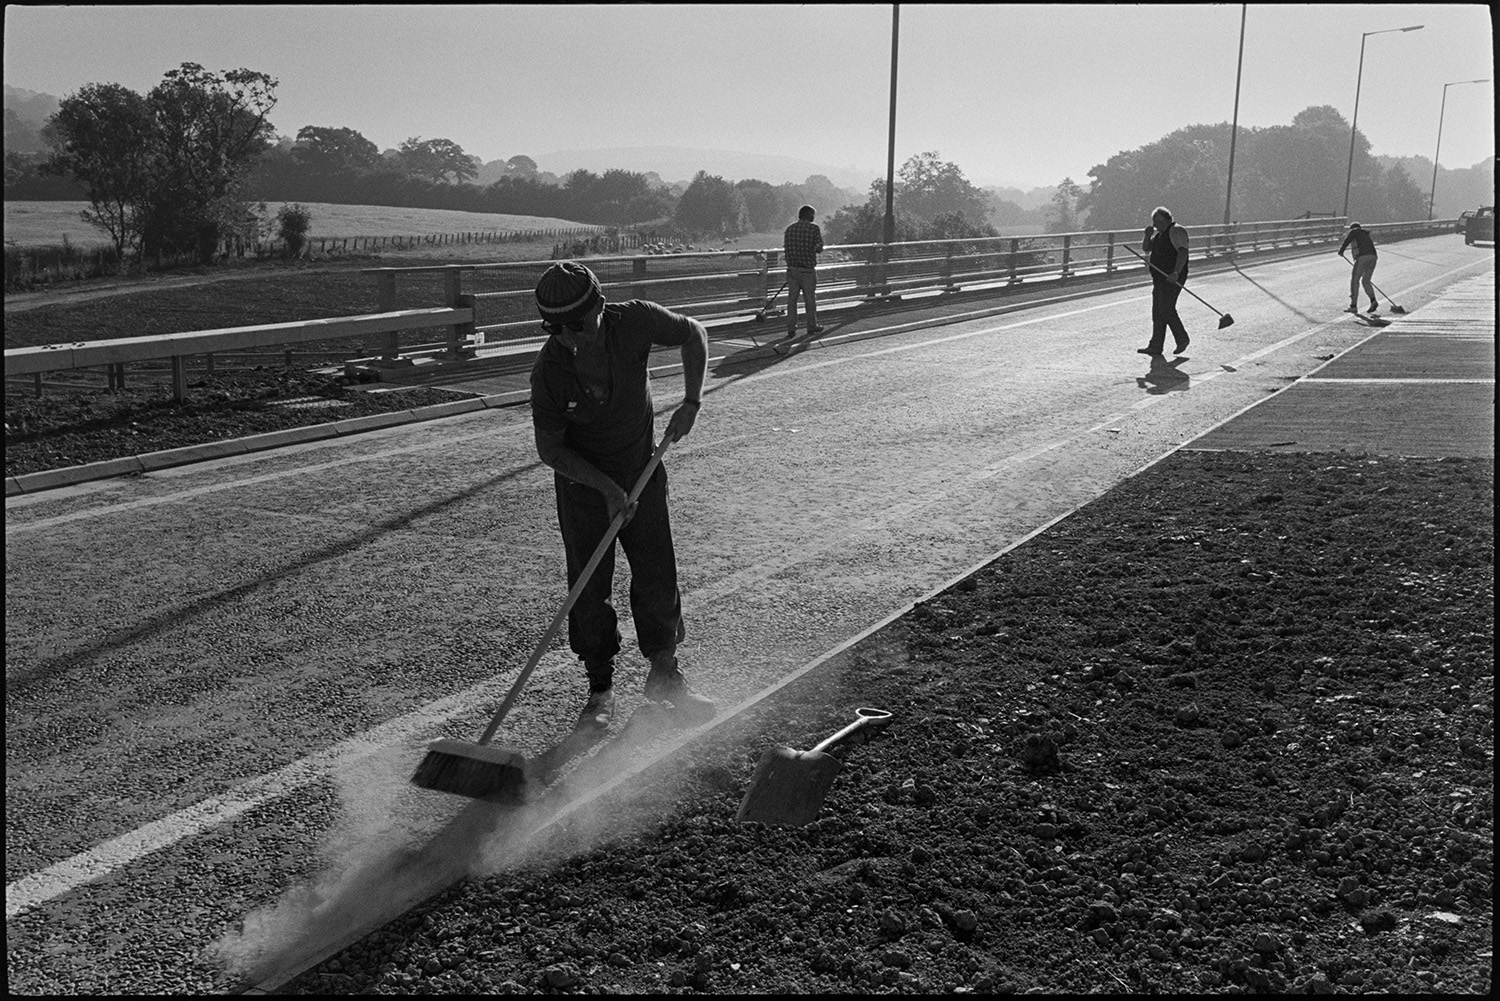 Men sweeping new link road before official opening.
[Four men sweeping the A361 North Devon Link Road near South Molton before the official opening.]